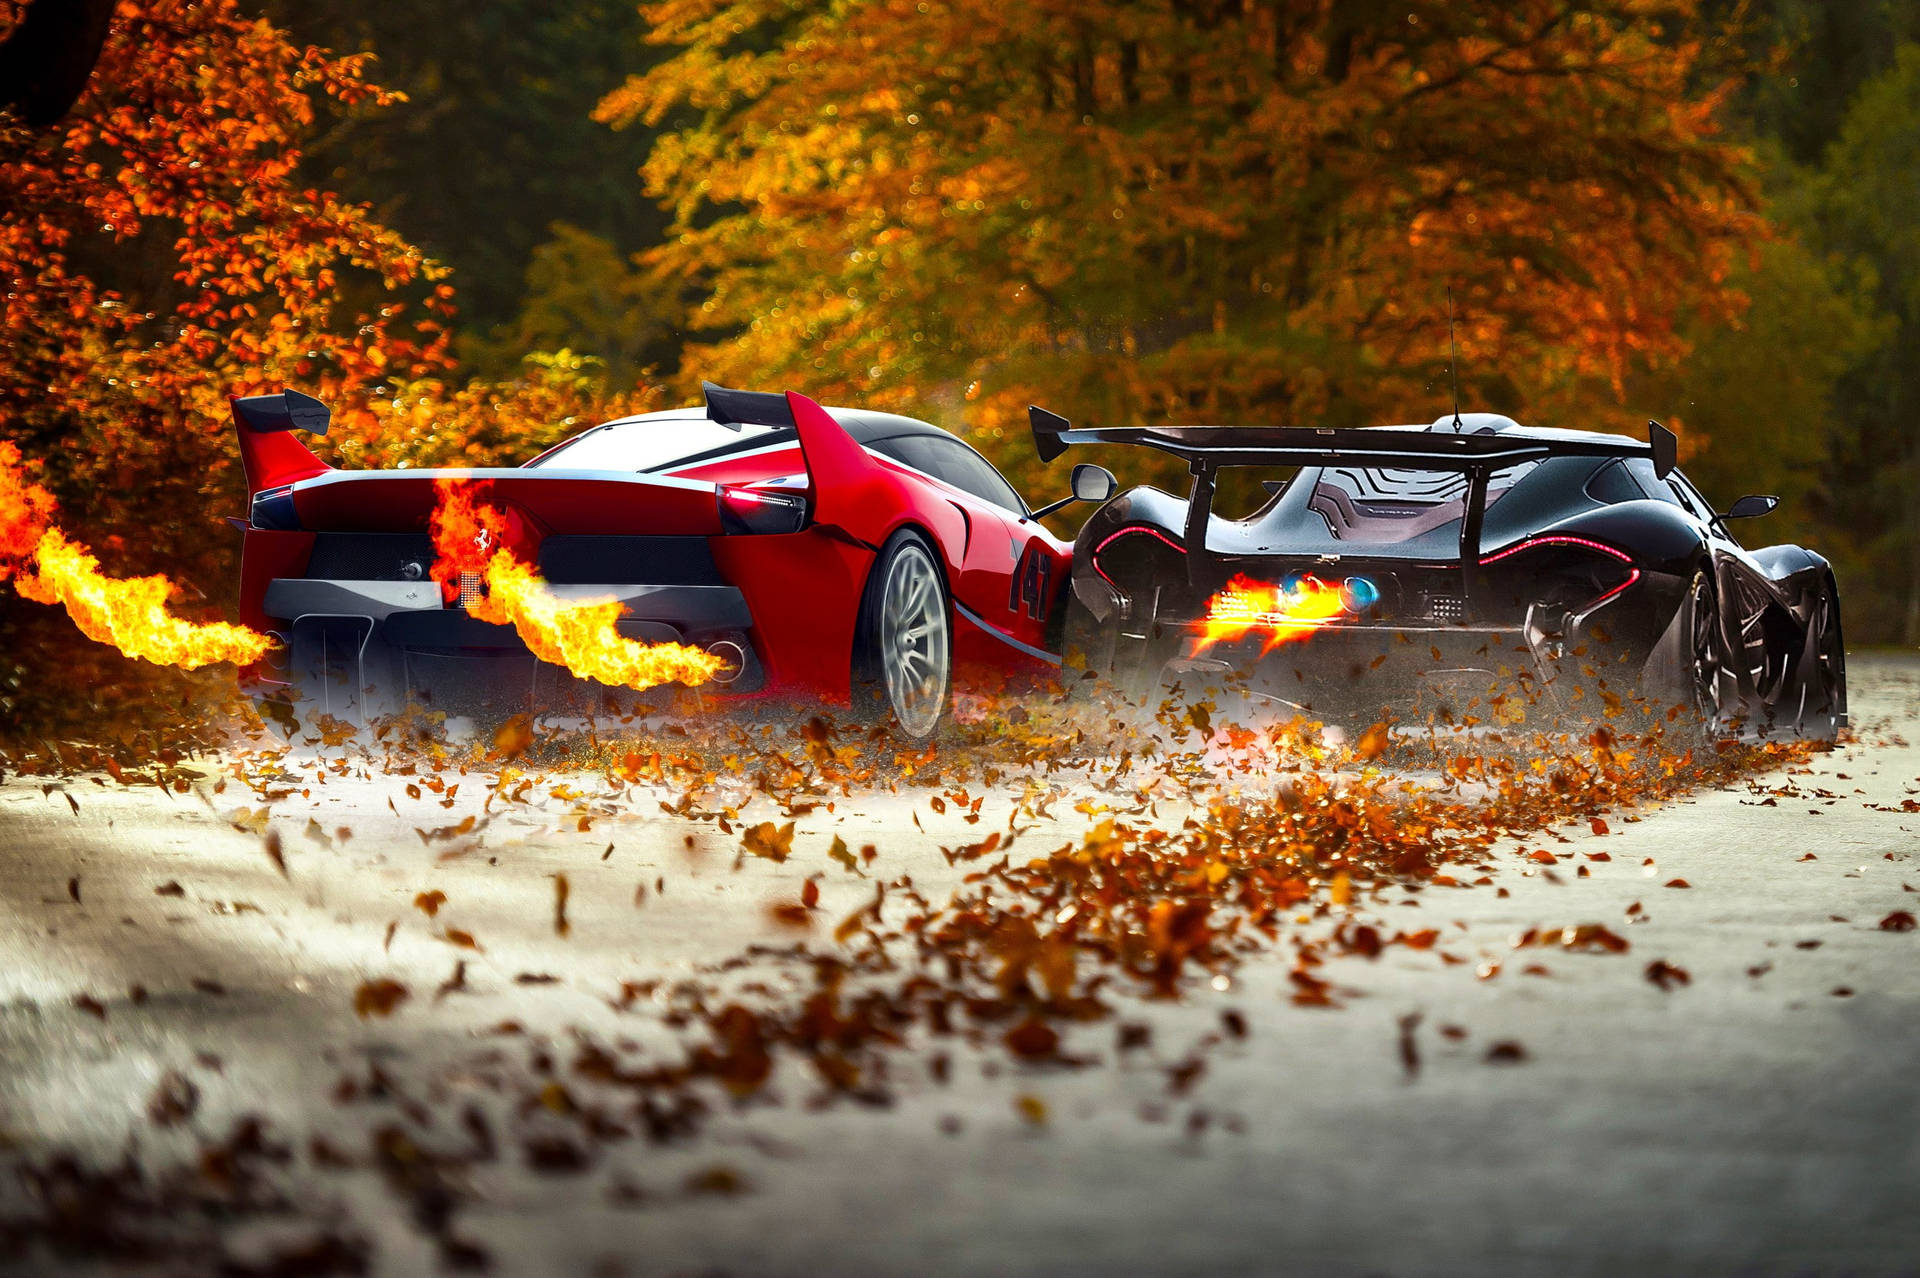 Two Ferrari Fire Cars On Autumn Road Background